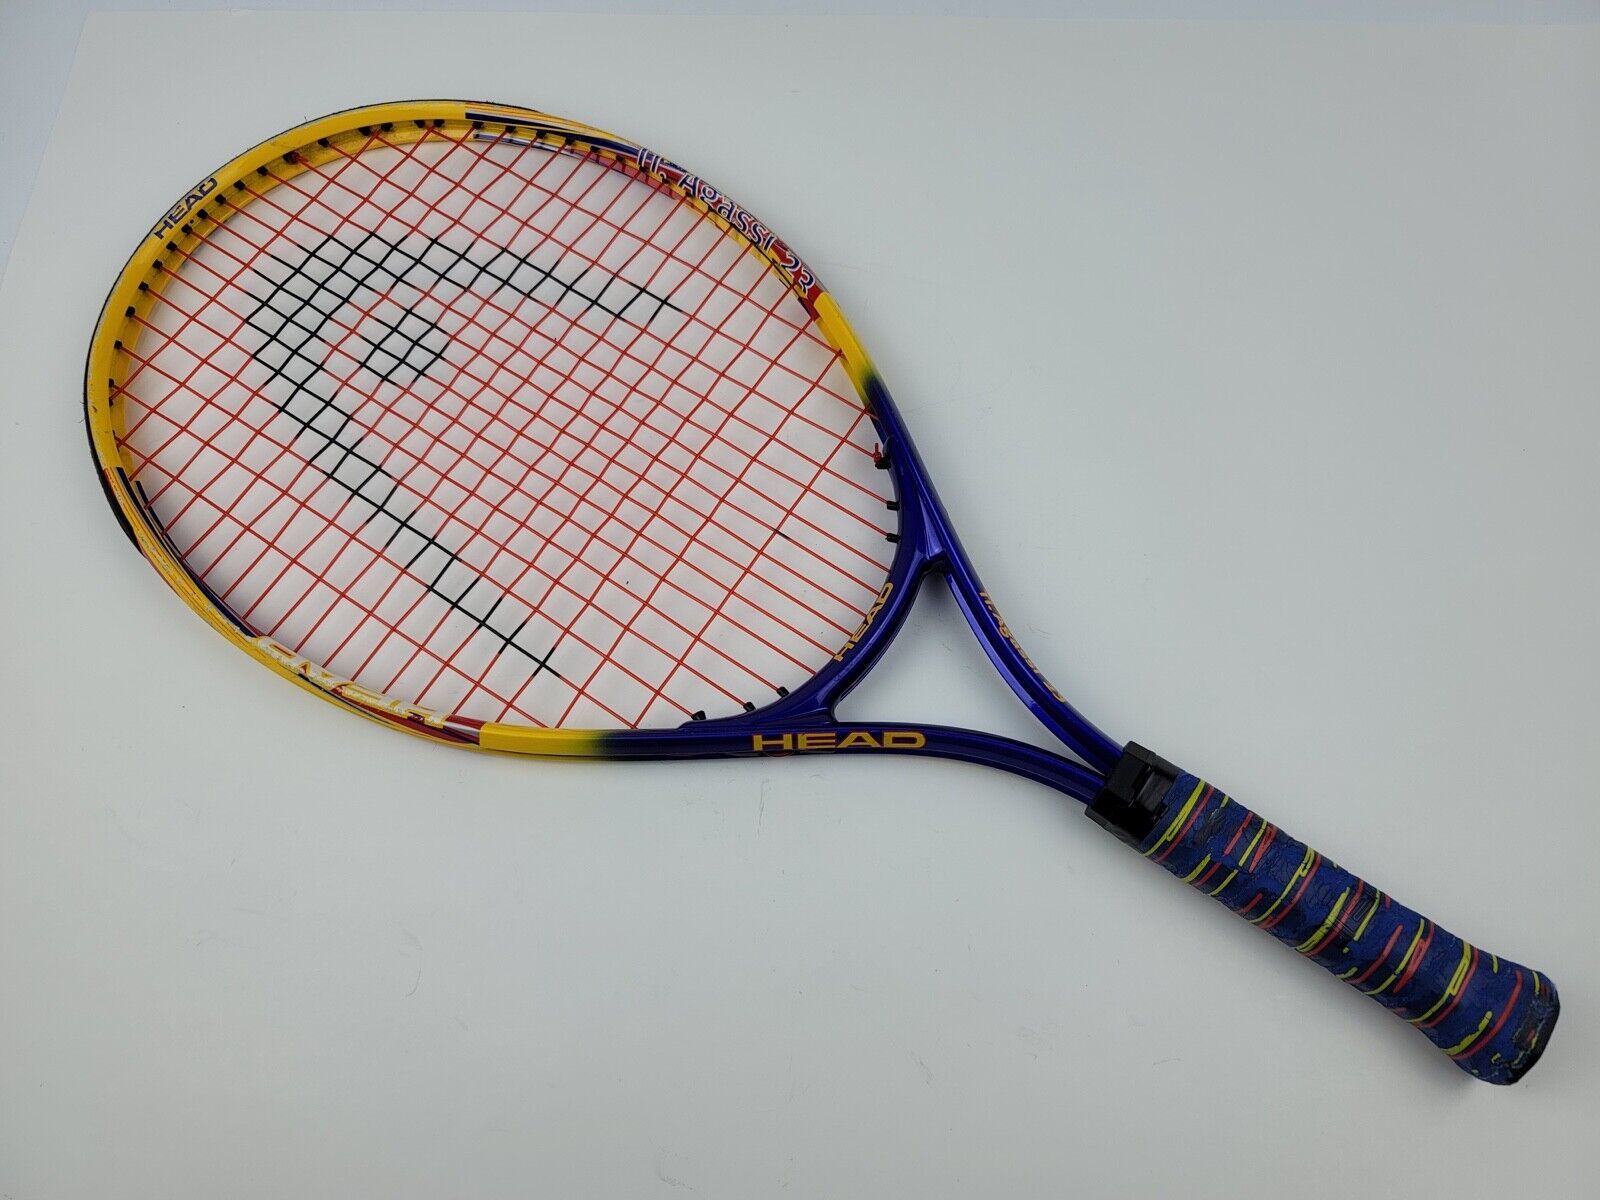 Primary image for Head TI. AGASSI Tennis Racket 23 Junior Series Racket 3 3/4 Grip Preowned